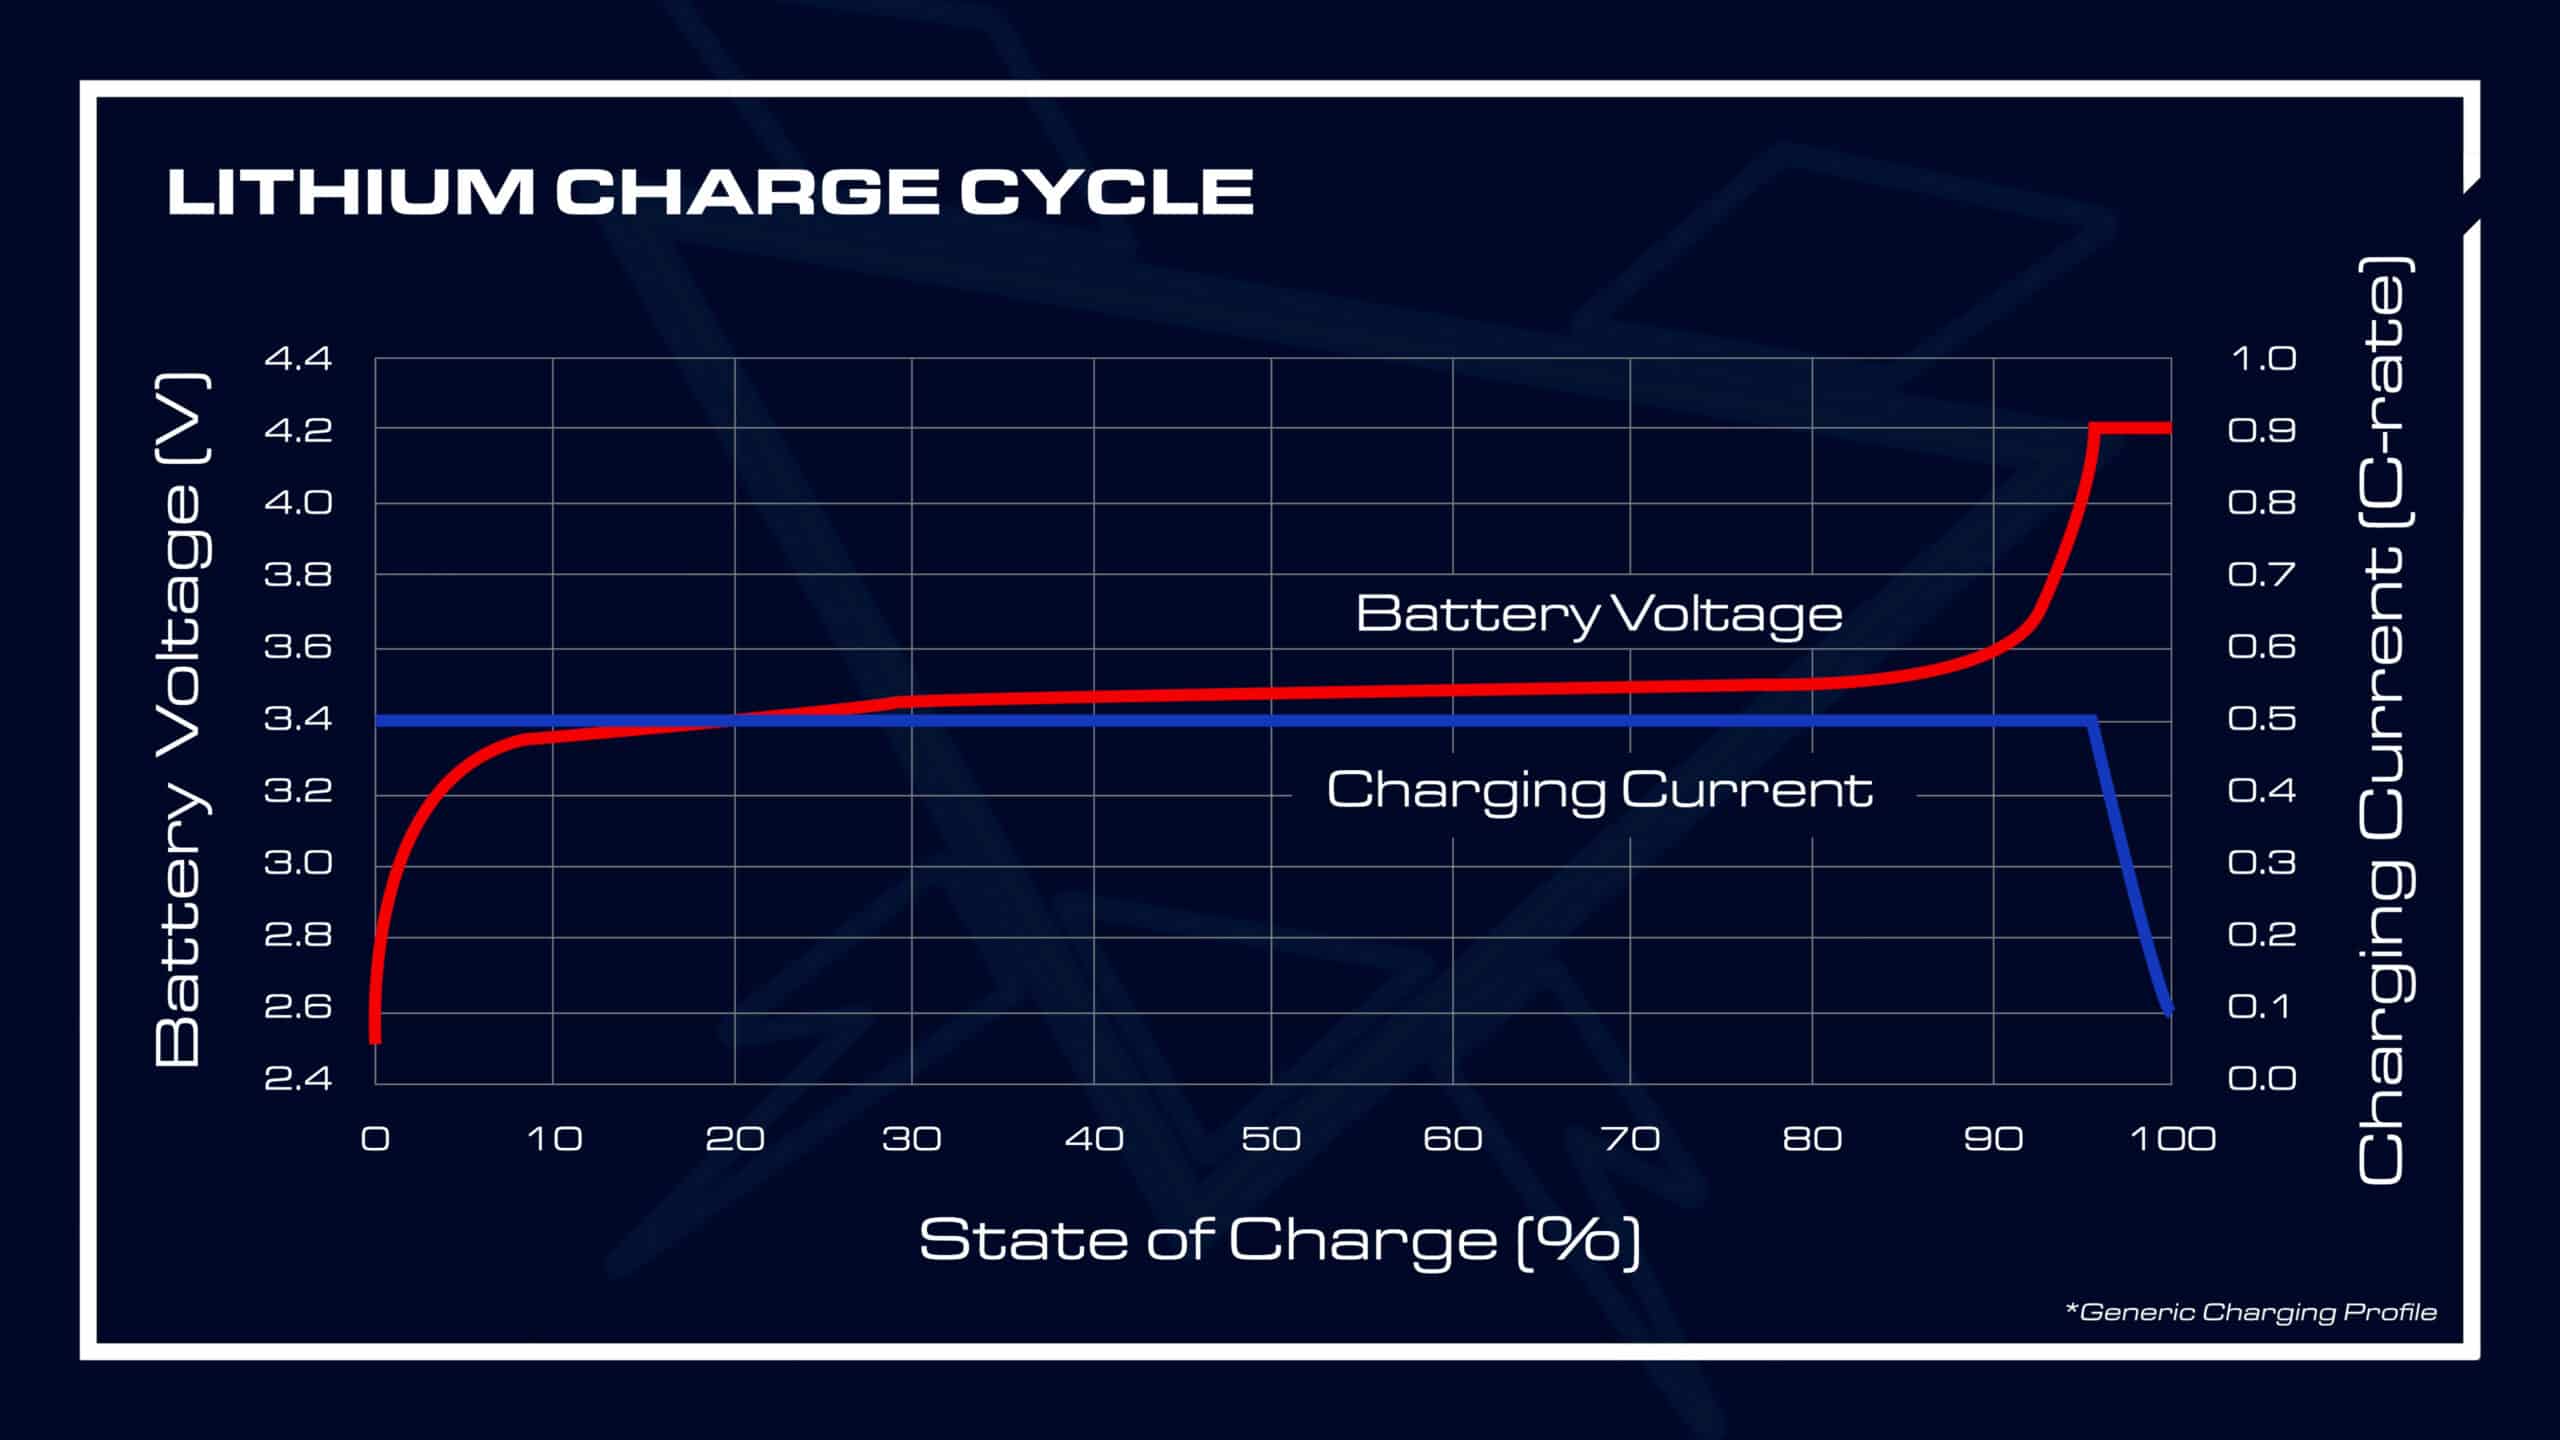 Lithium Charge Cycle